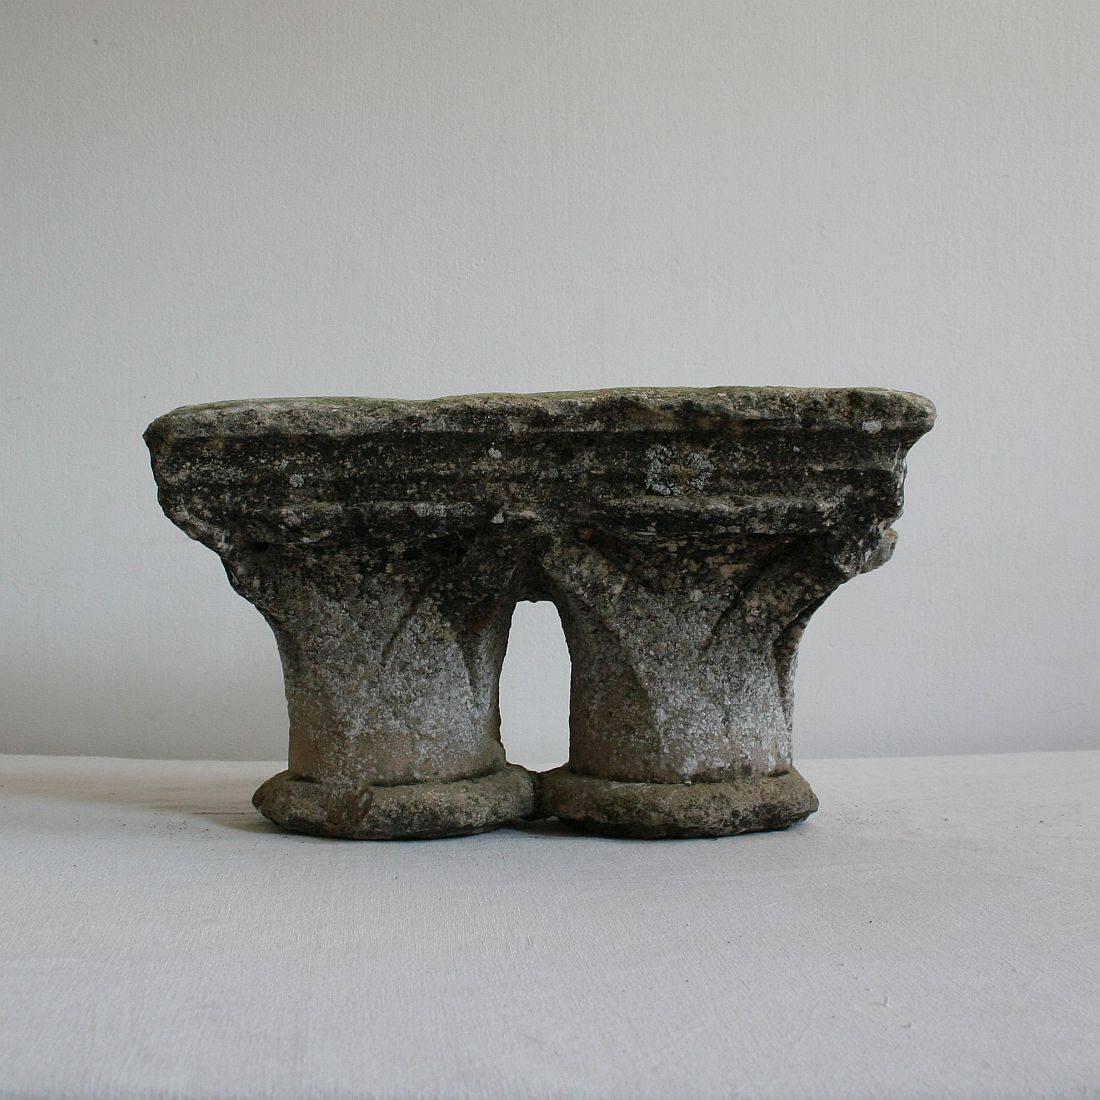 Rare hand-carved stone object from an old monastery with a beautiful weathered look. Unique item with a high decorative value
France, circa 1250-1350.